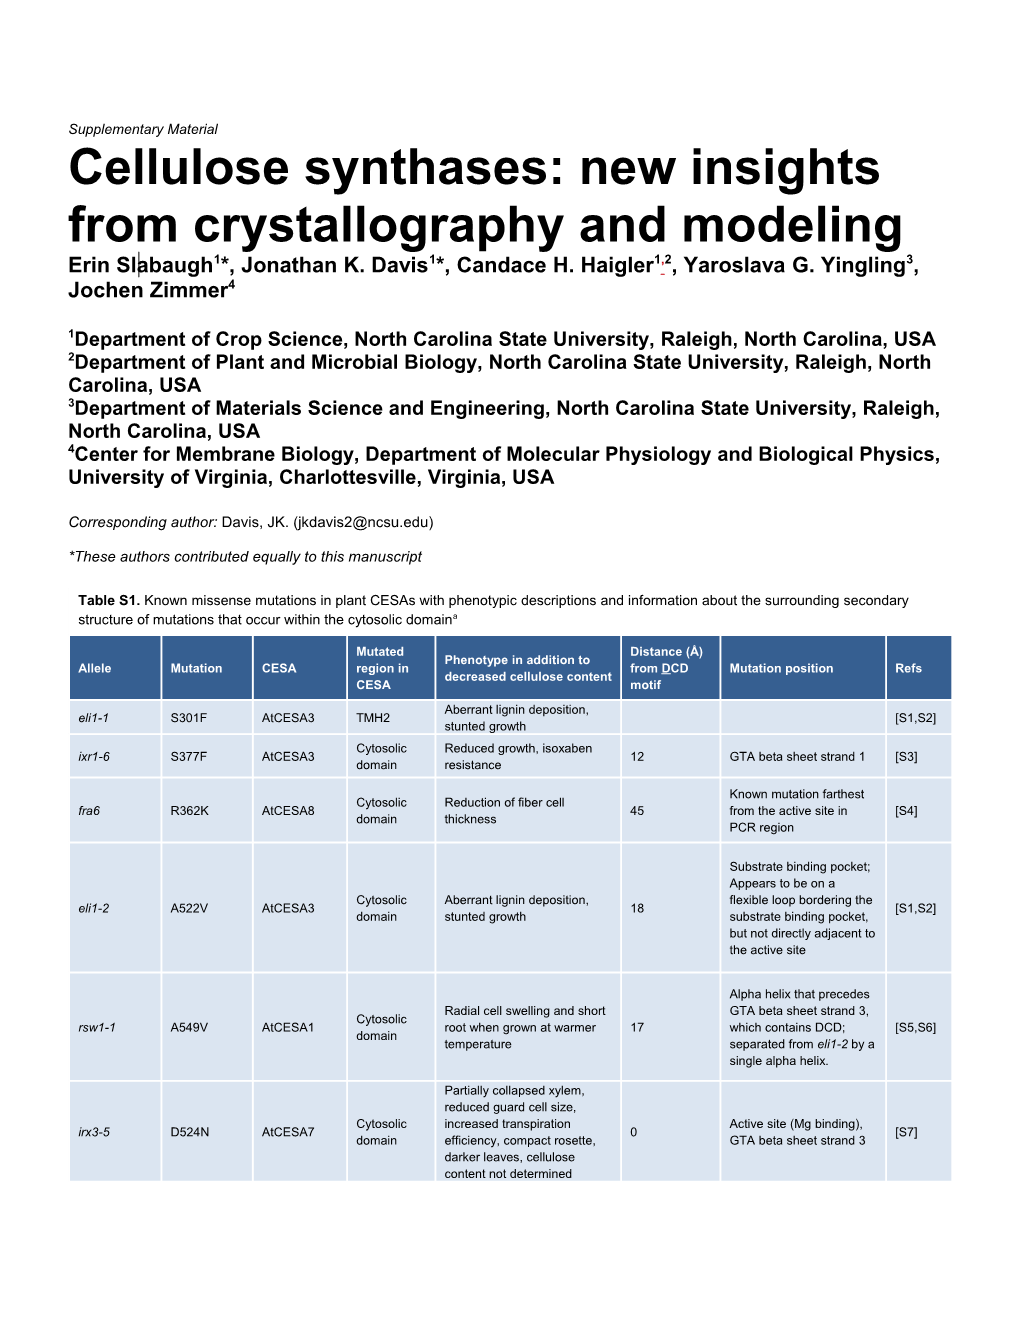 Cellulose Synthases: New Insights from Crystallography and Modeling